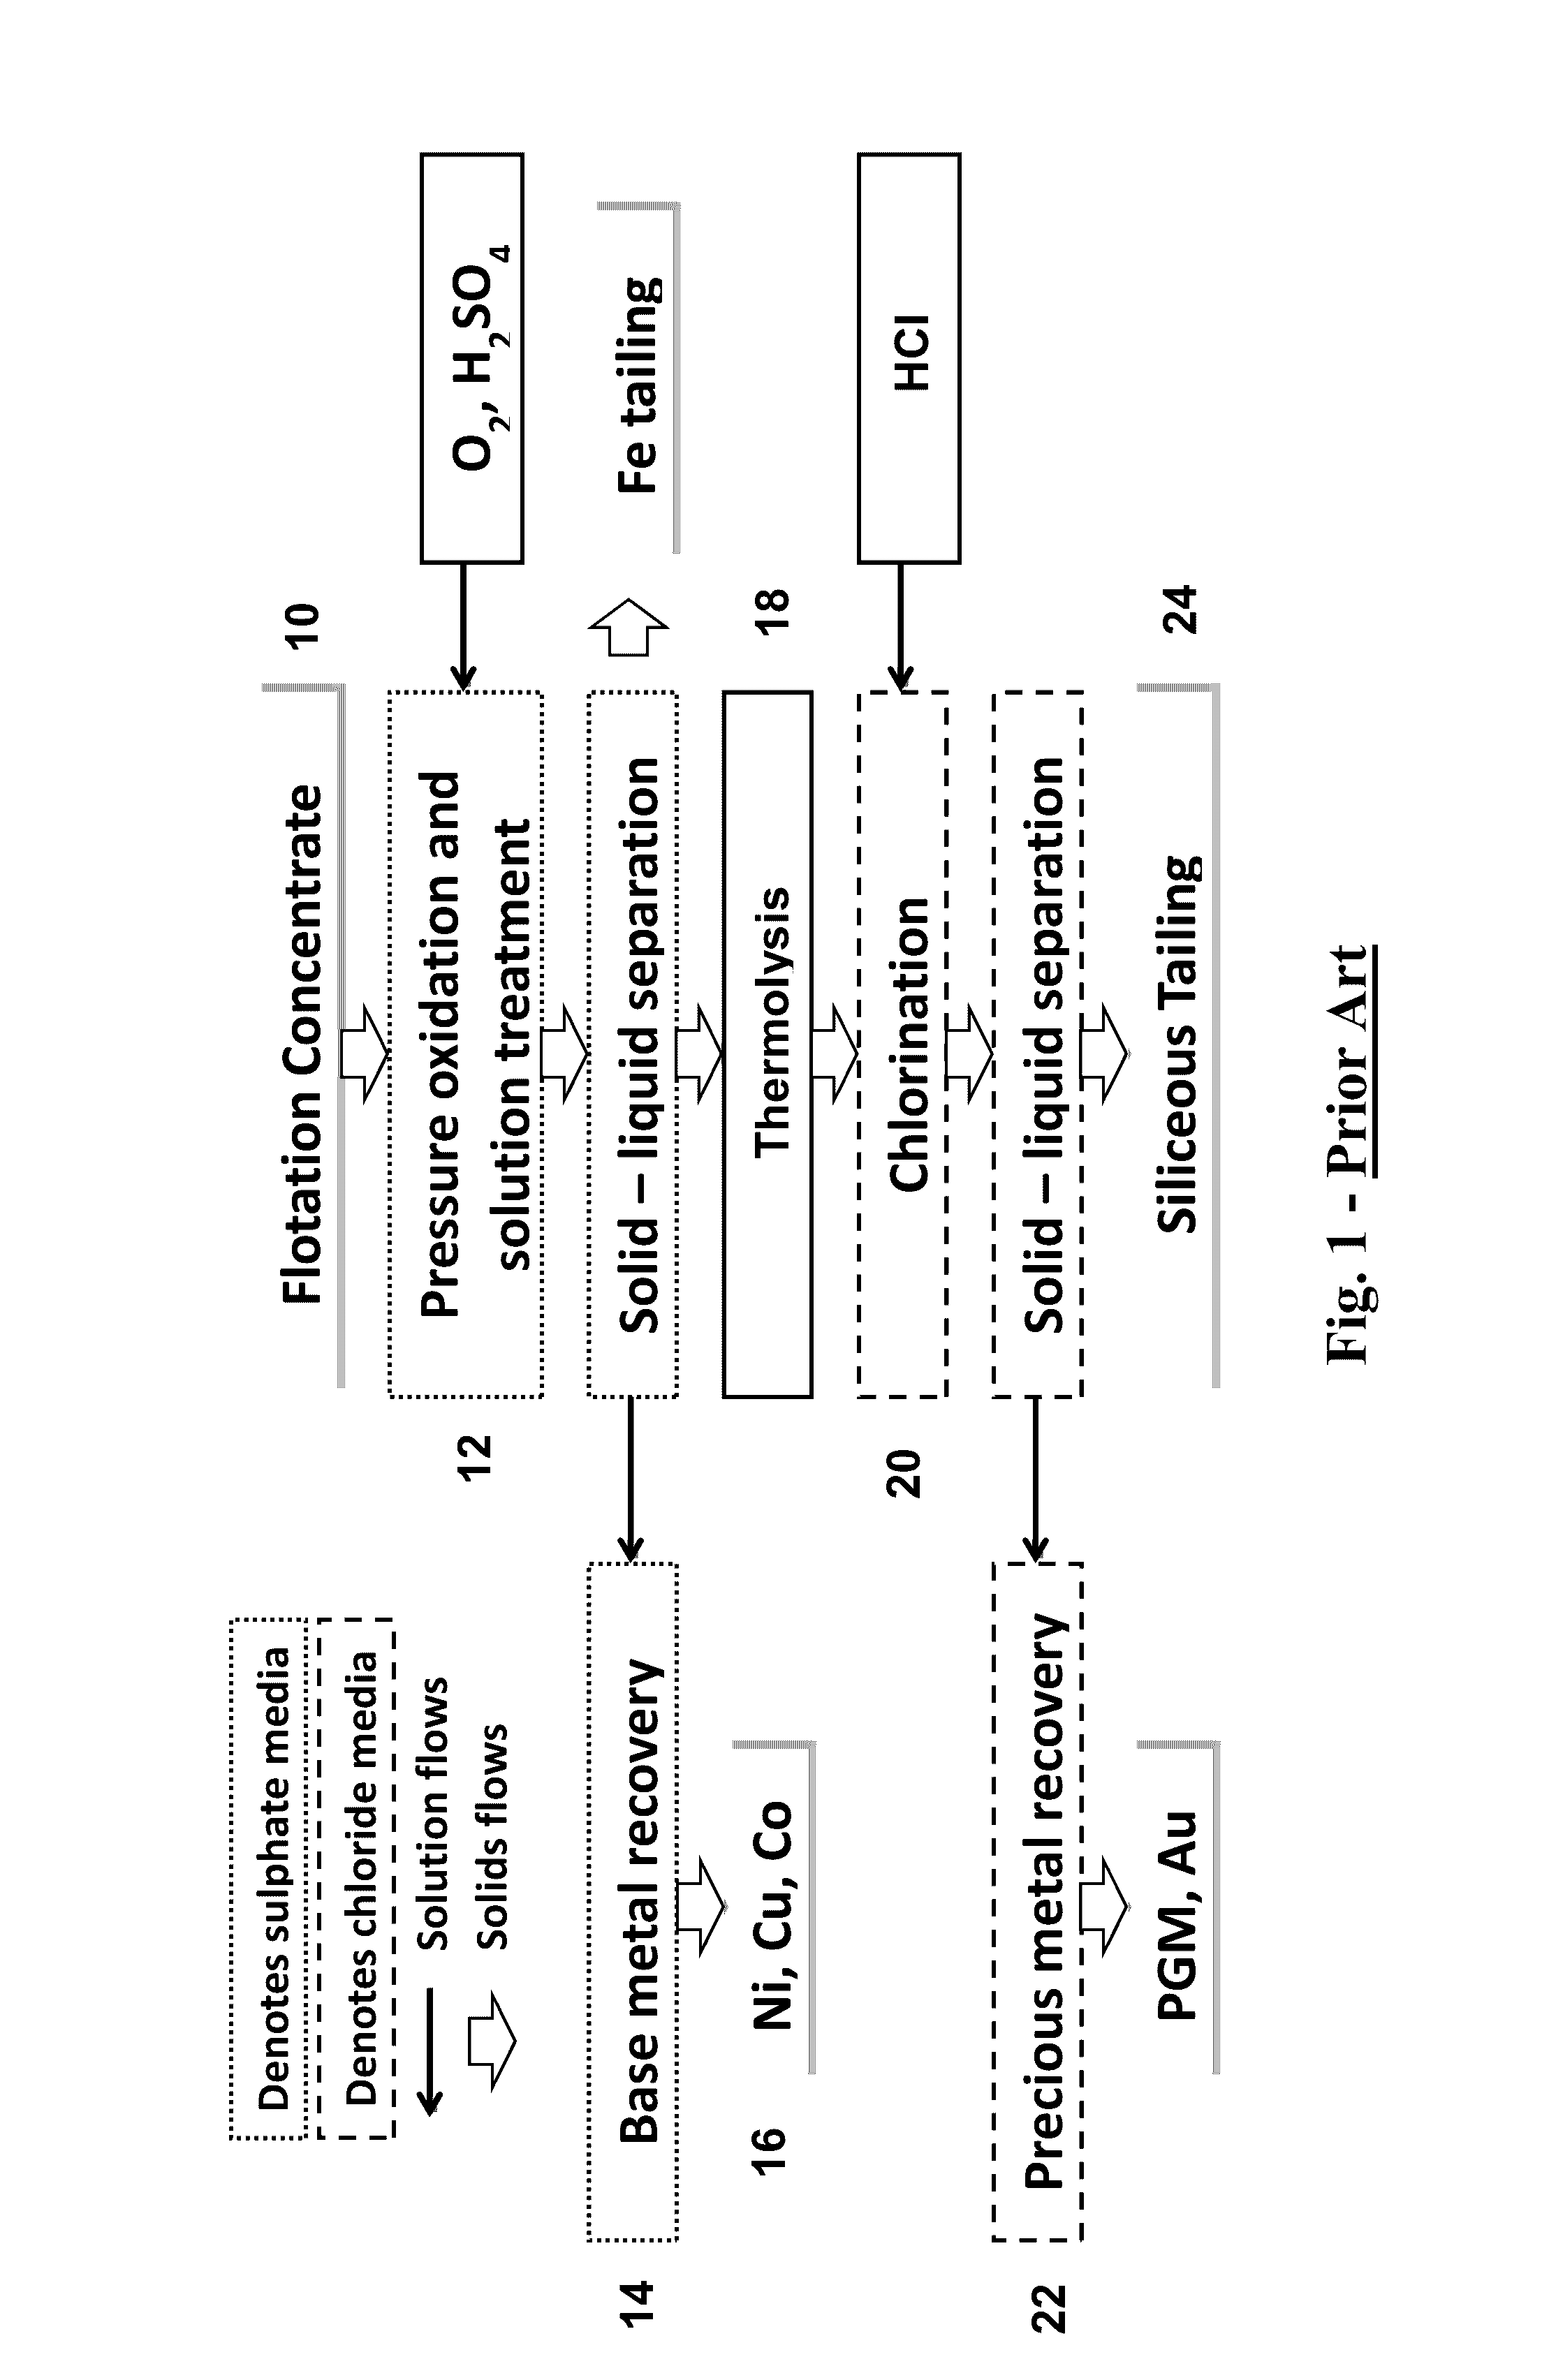 Hydrometallurgical treatment process for extraction of metals from concentrates